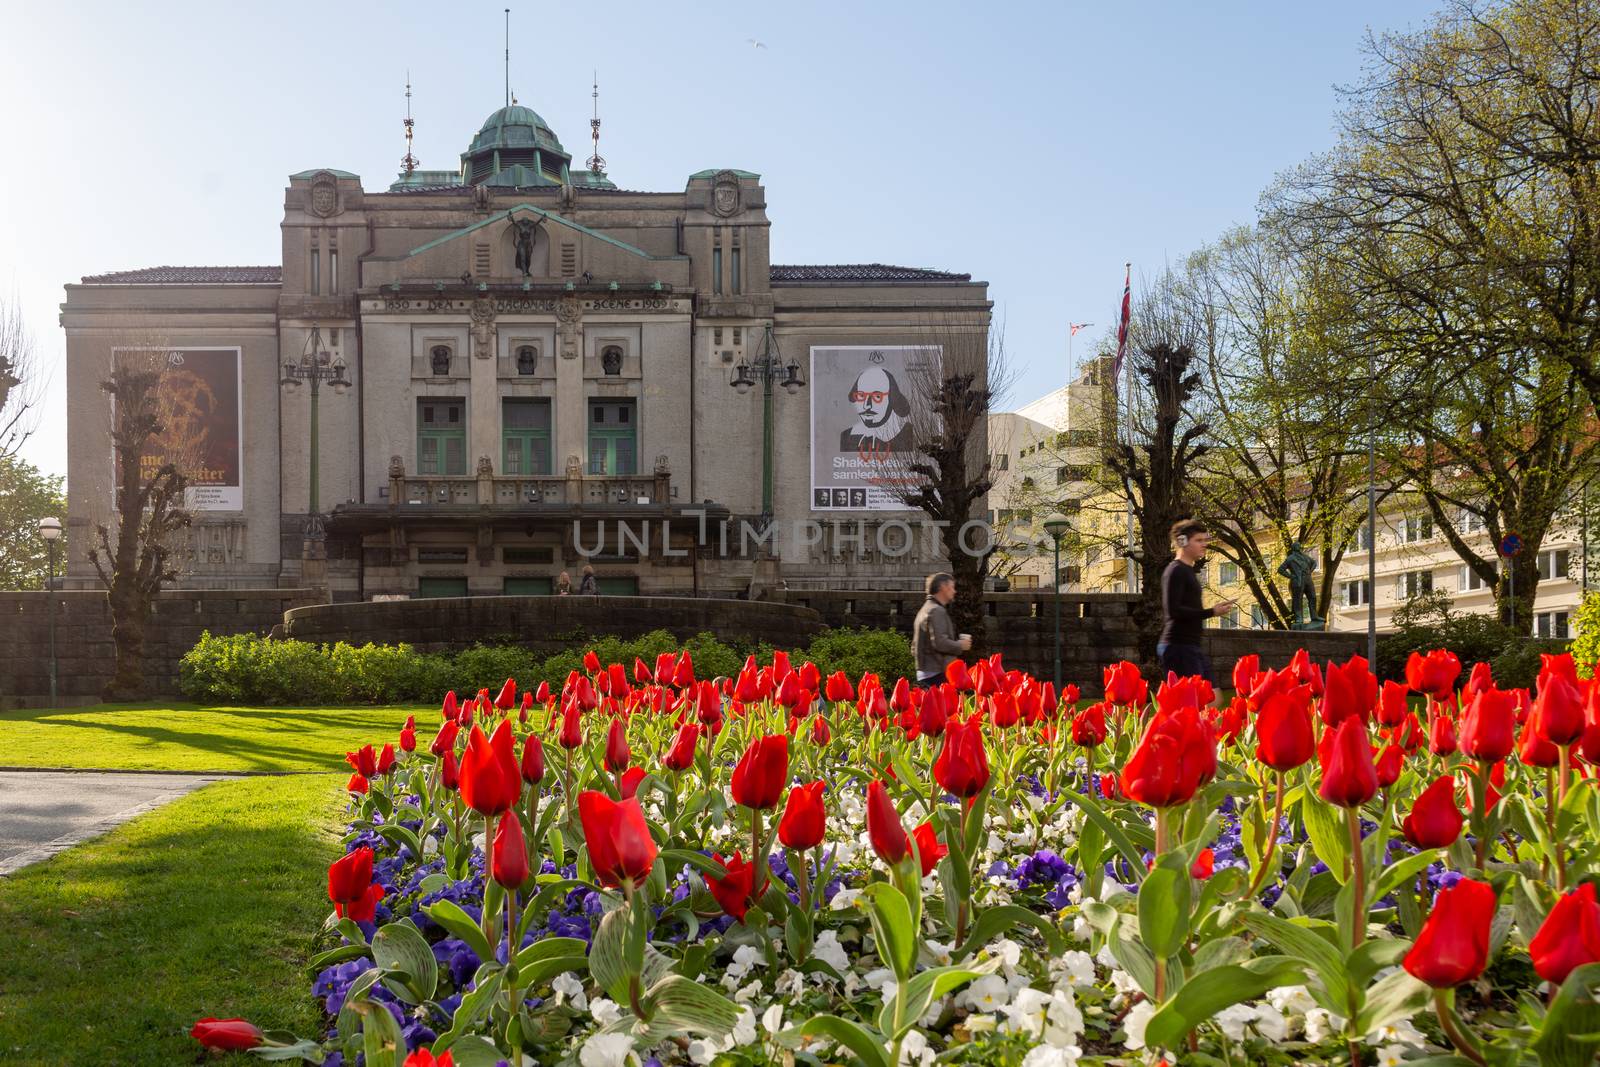 Bergen, Norway, May 2015: The National Stage, or Den Nationale Scene area in Bergen, Norway on a sunny day in spring with tulips in foreground.